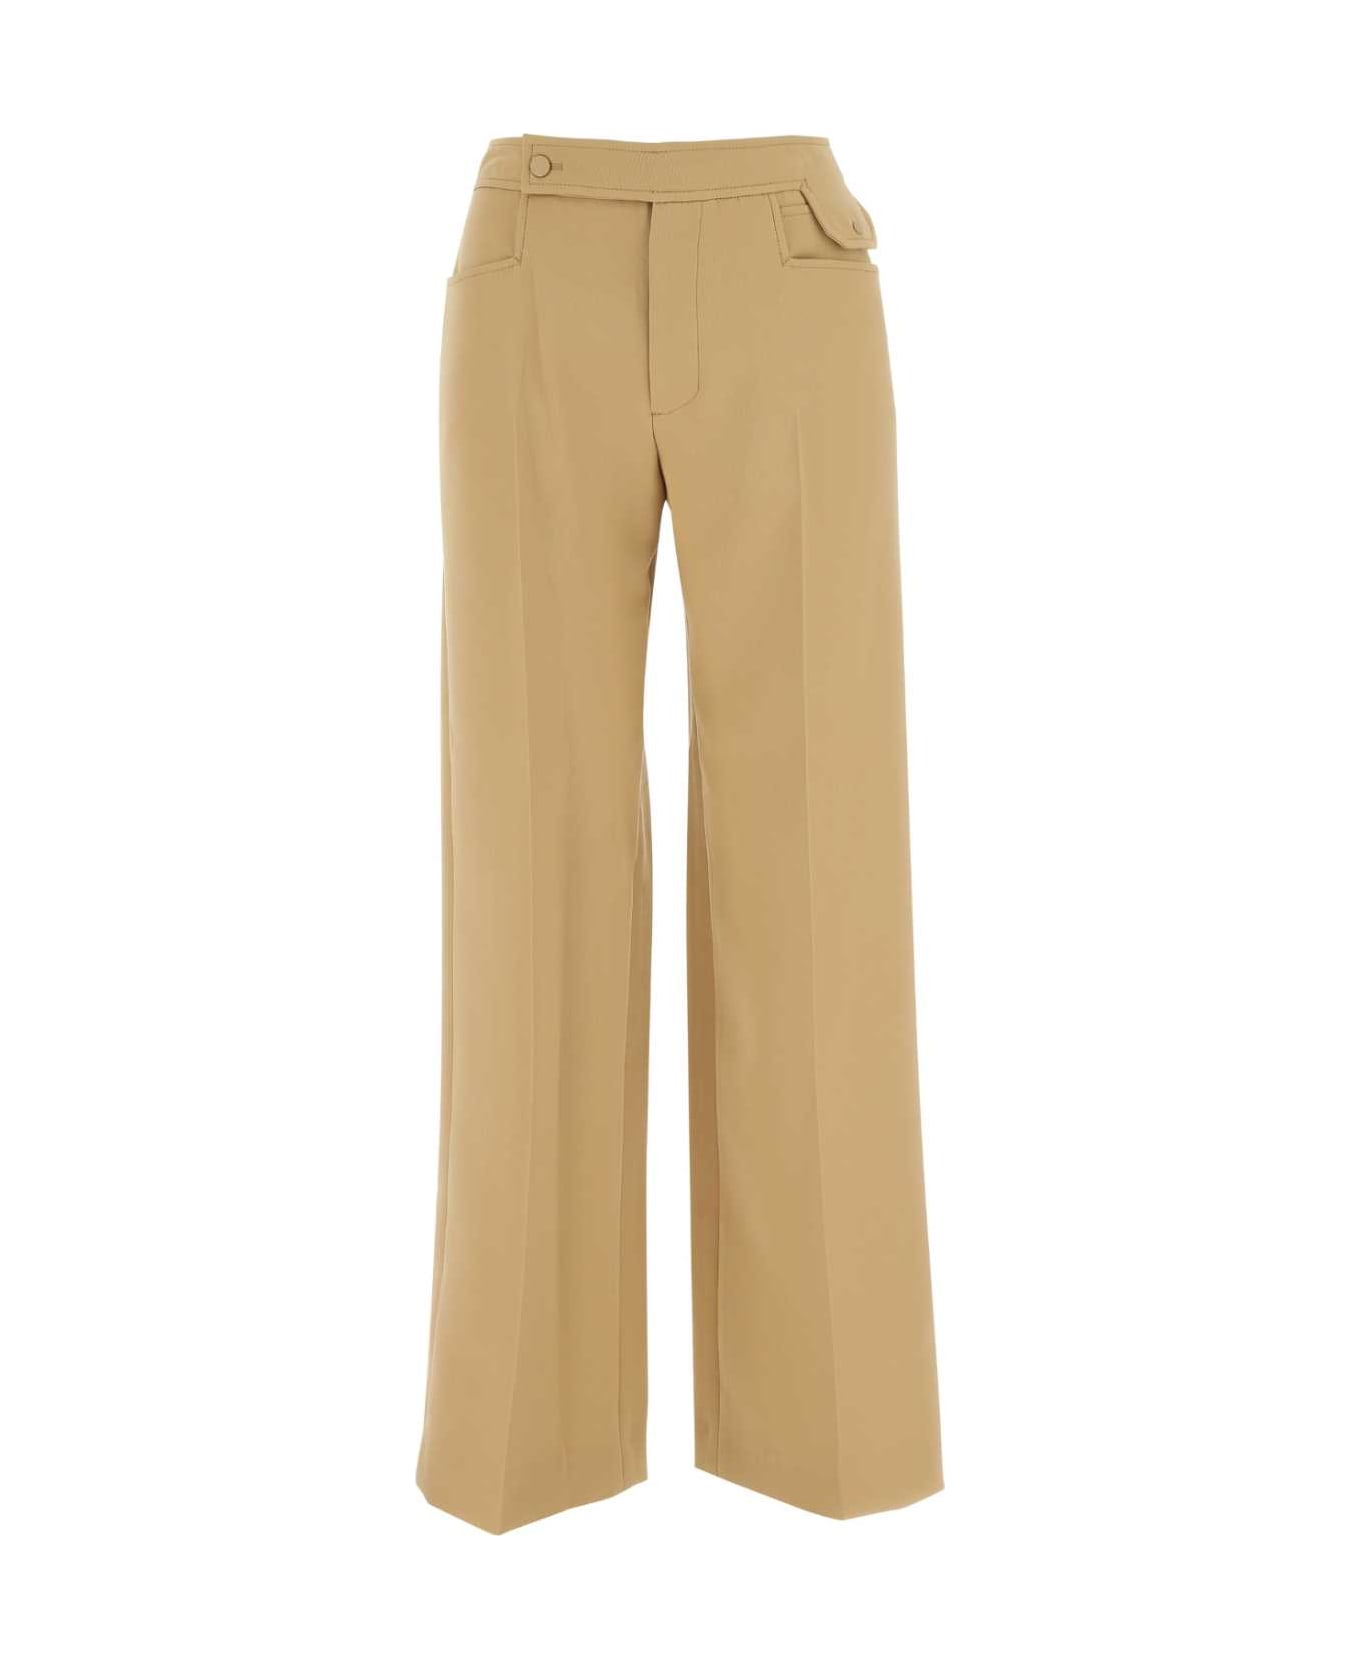 Low Classic Camel Polyester Wide-leg Pant - 0269 ボトムス